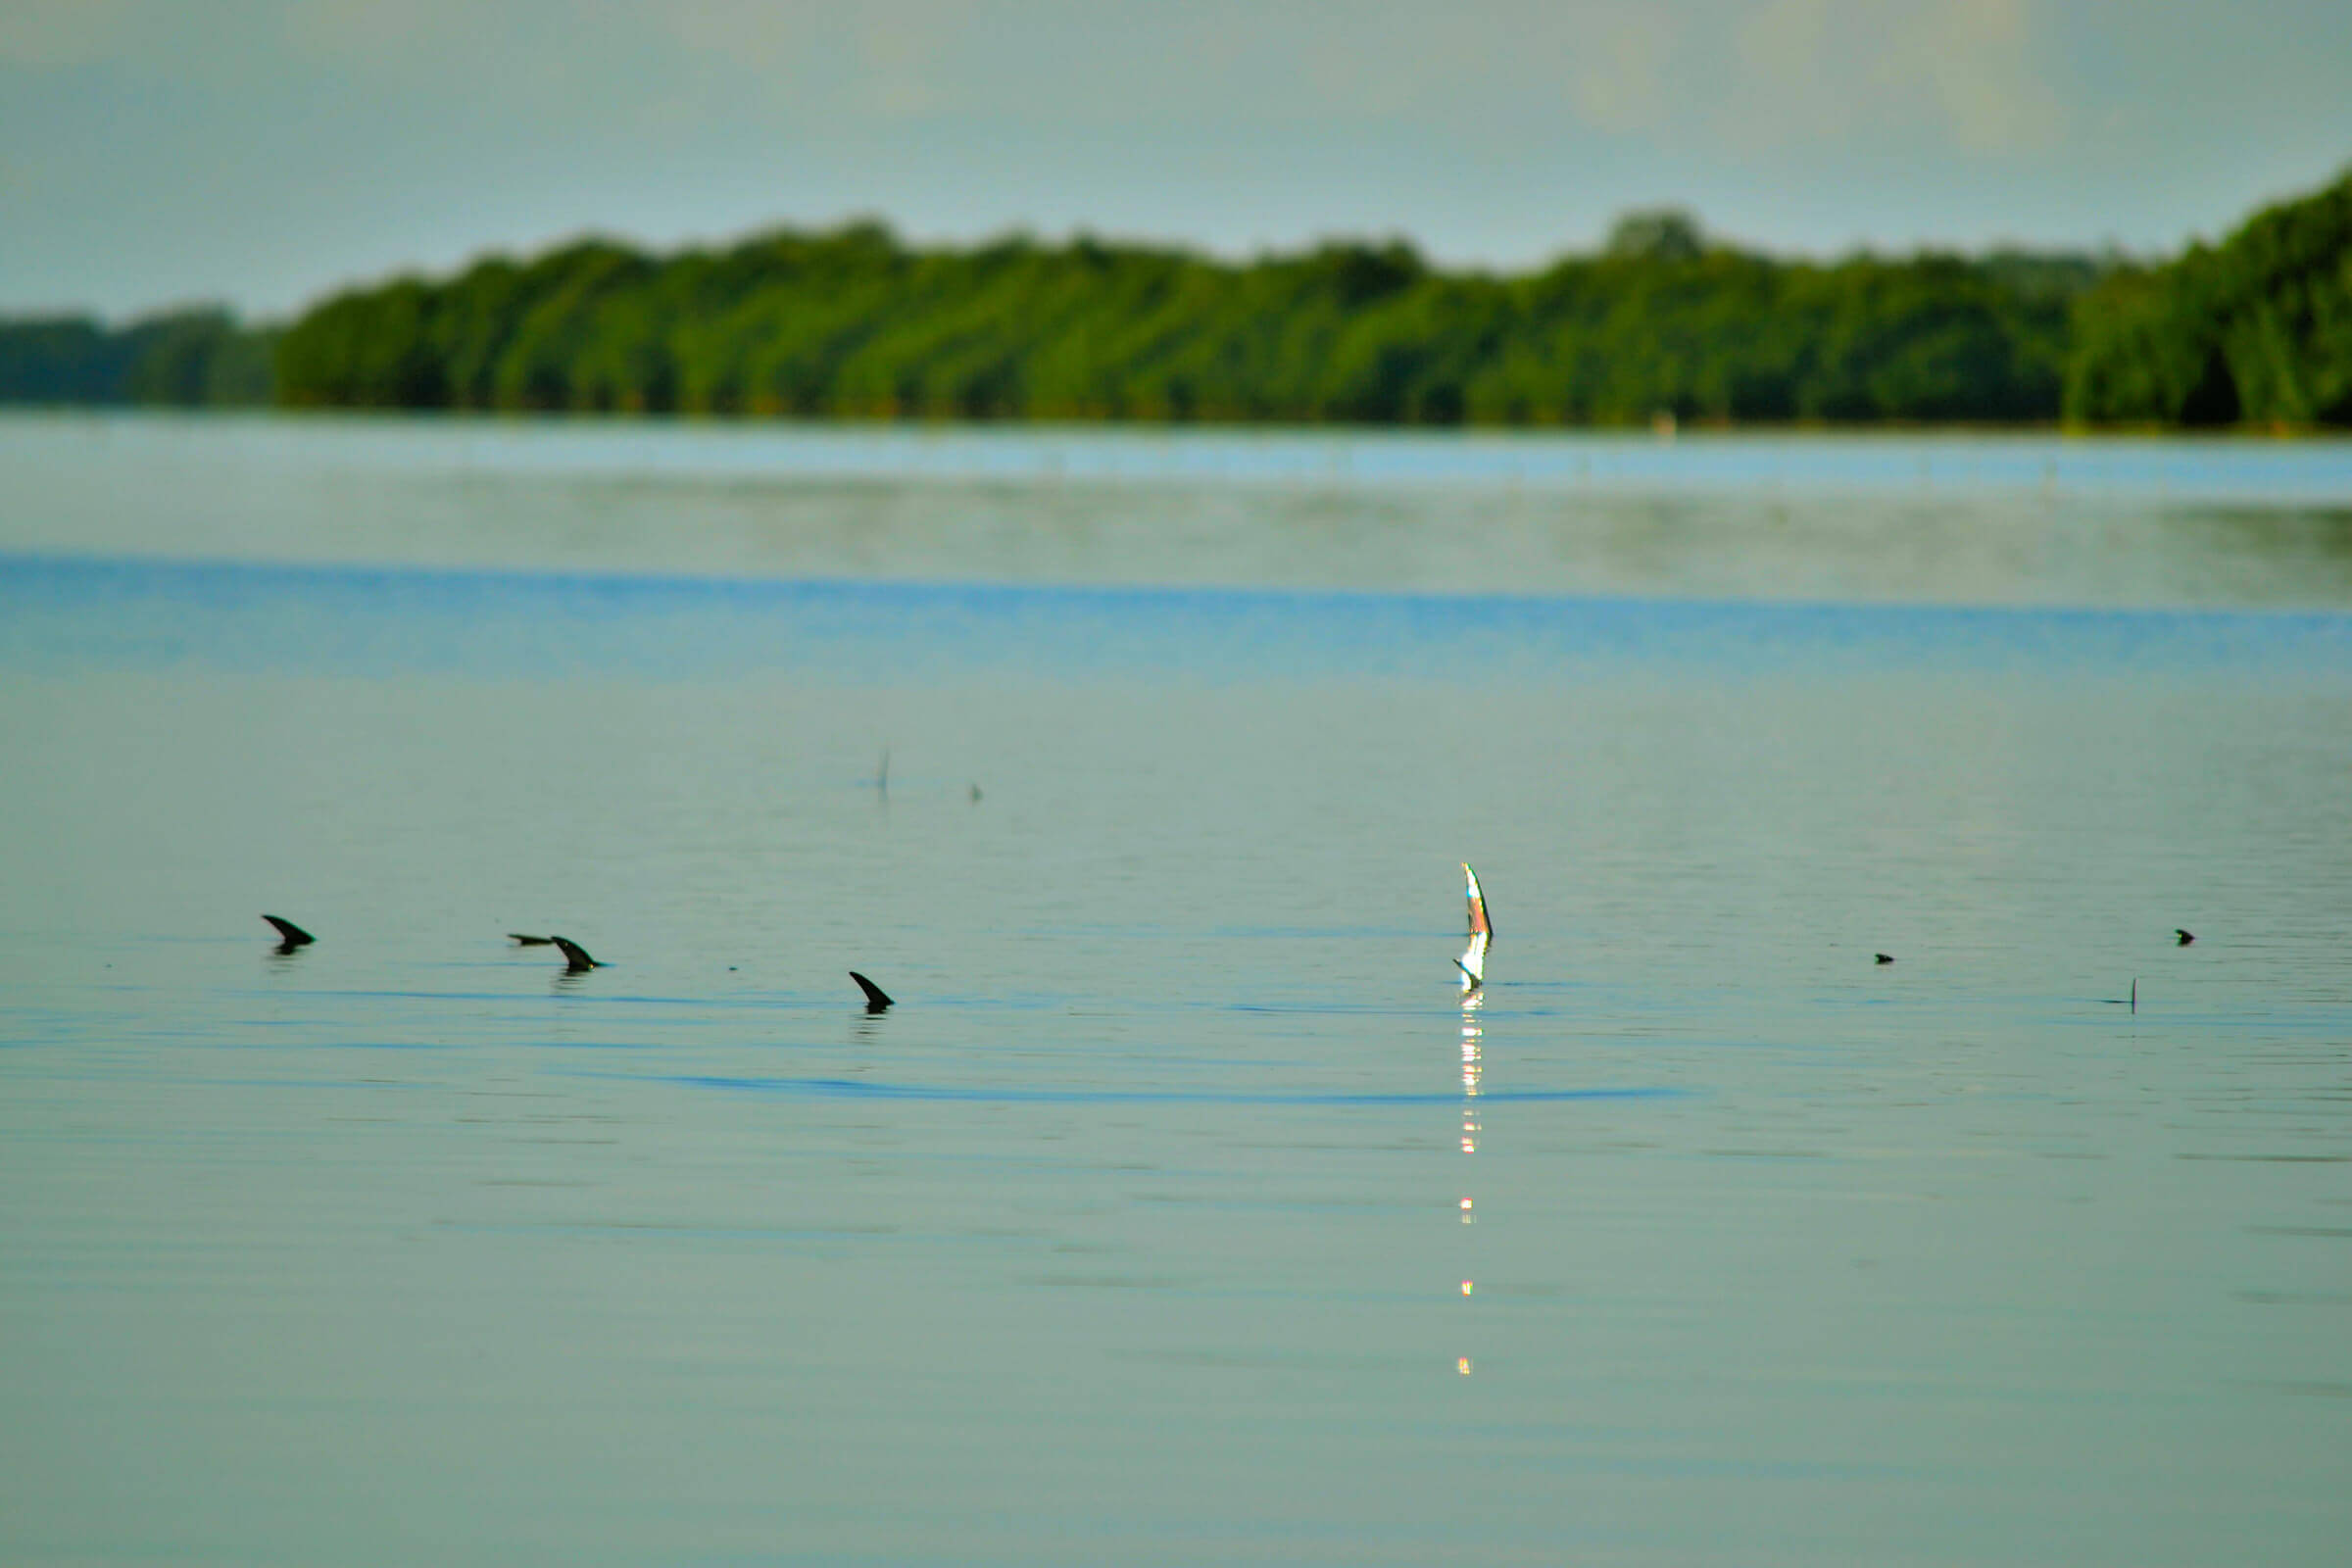 tailing permit in the florida keys - tail fly fishing magazine - the voice of saltwater fly fishing